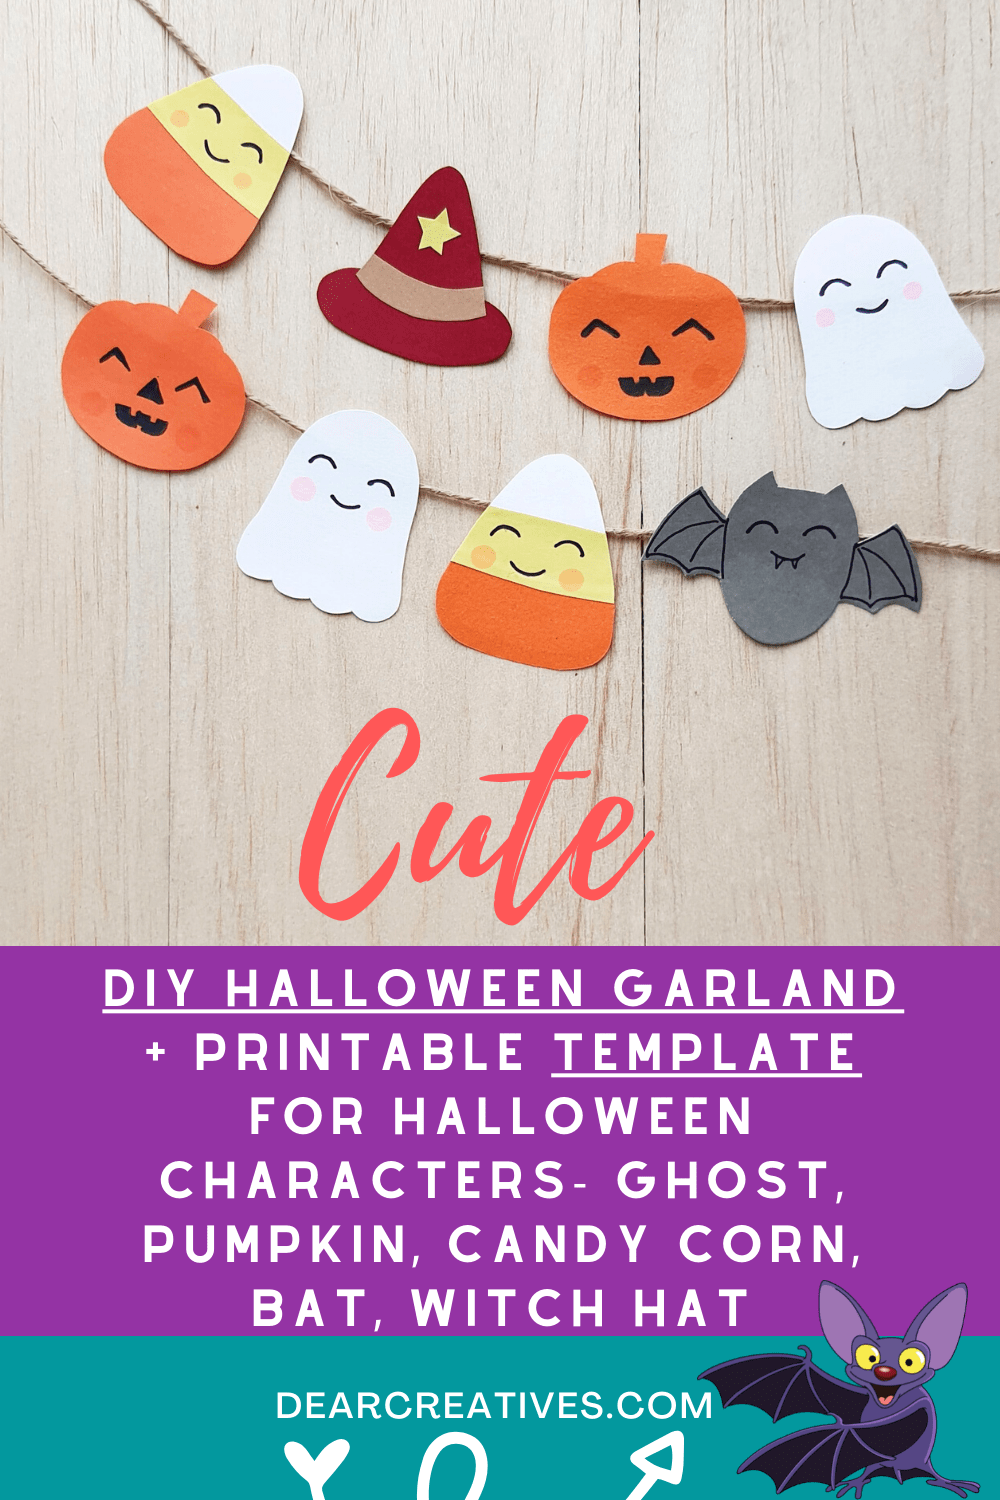 DIY-Halloween-Garland-Grab-the-printable-template-to-make-a-banner-with-a-ghost-bat-witch-hat-pumpkin-and-candy-corn.-Instructions-for-this-Halloween-craft-and-template-at-DearCreatives.com